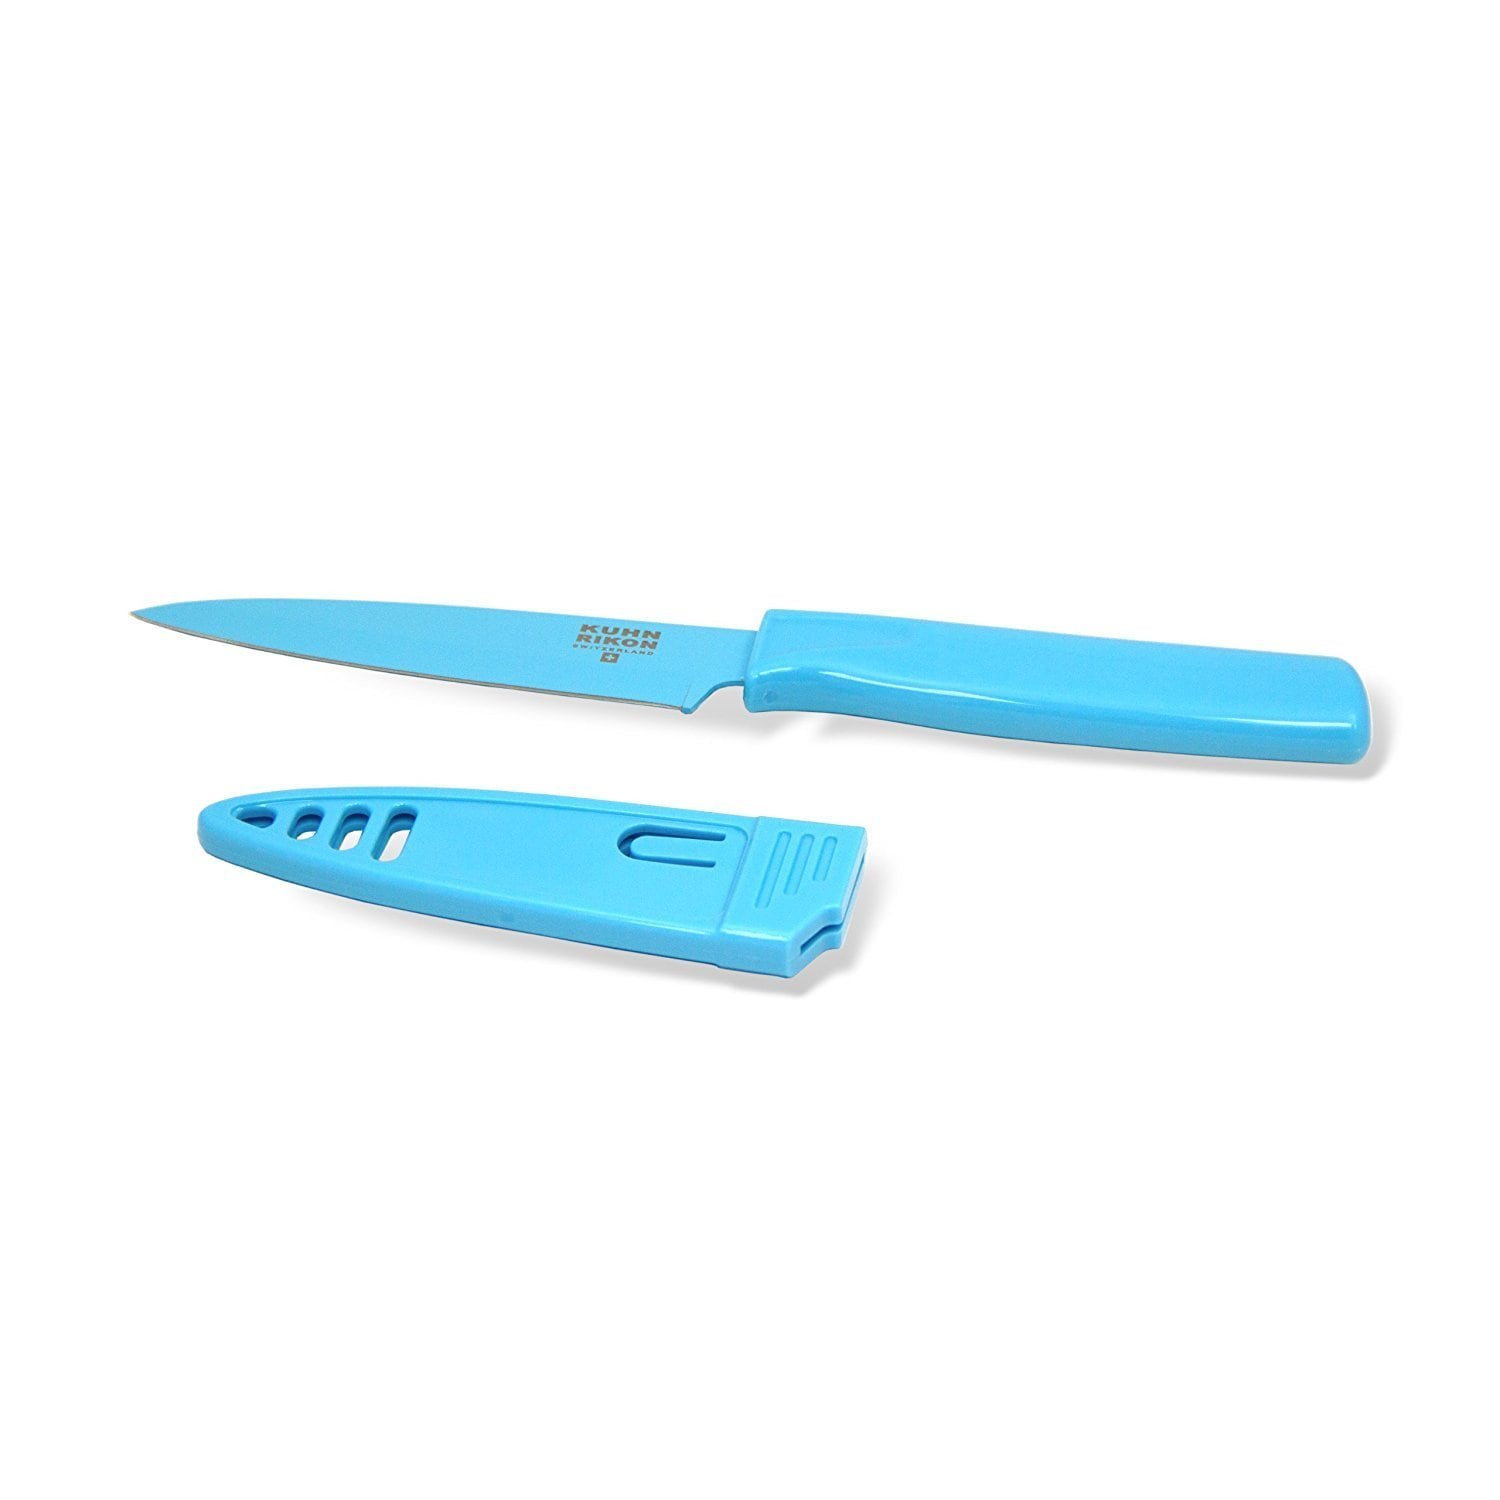 Kuhn Rikon Colori + 4 Inch Paring Knife With Sheath Green and SS